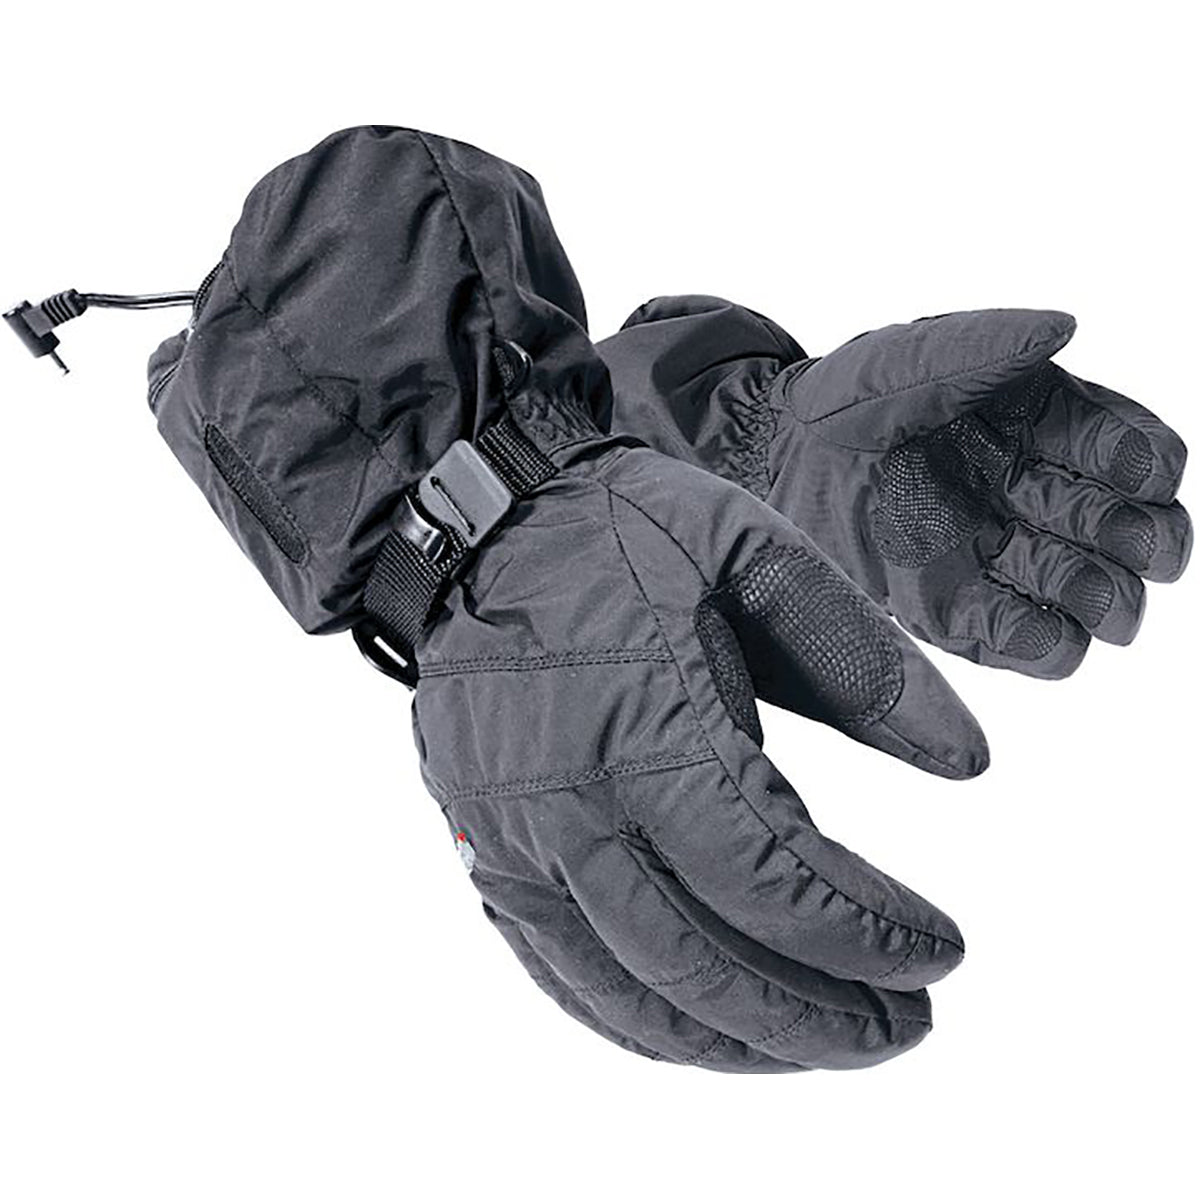 Mobile Warming Textile Heated Men's Street Gloves-7609